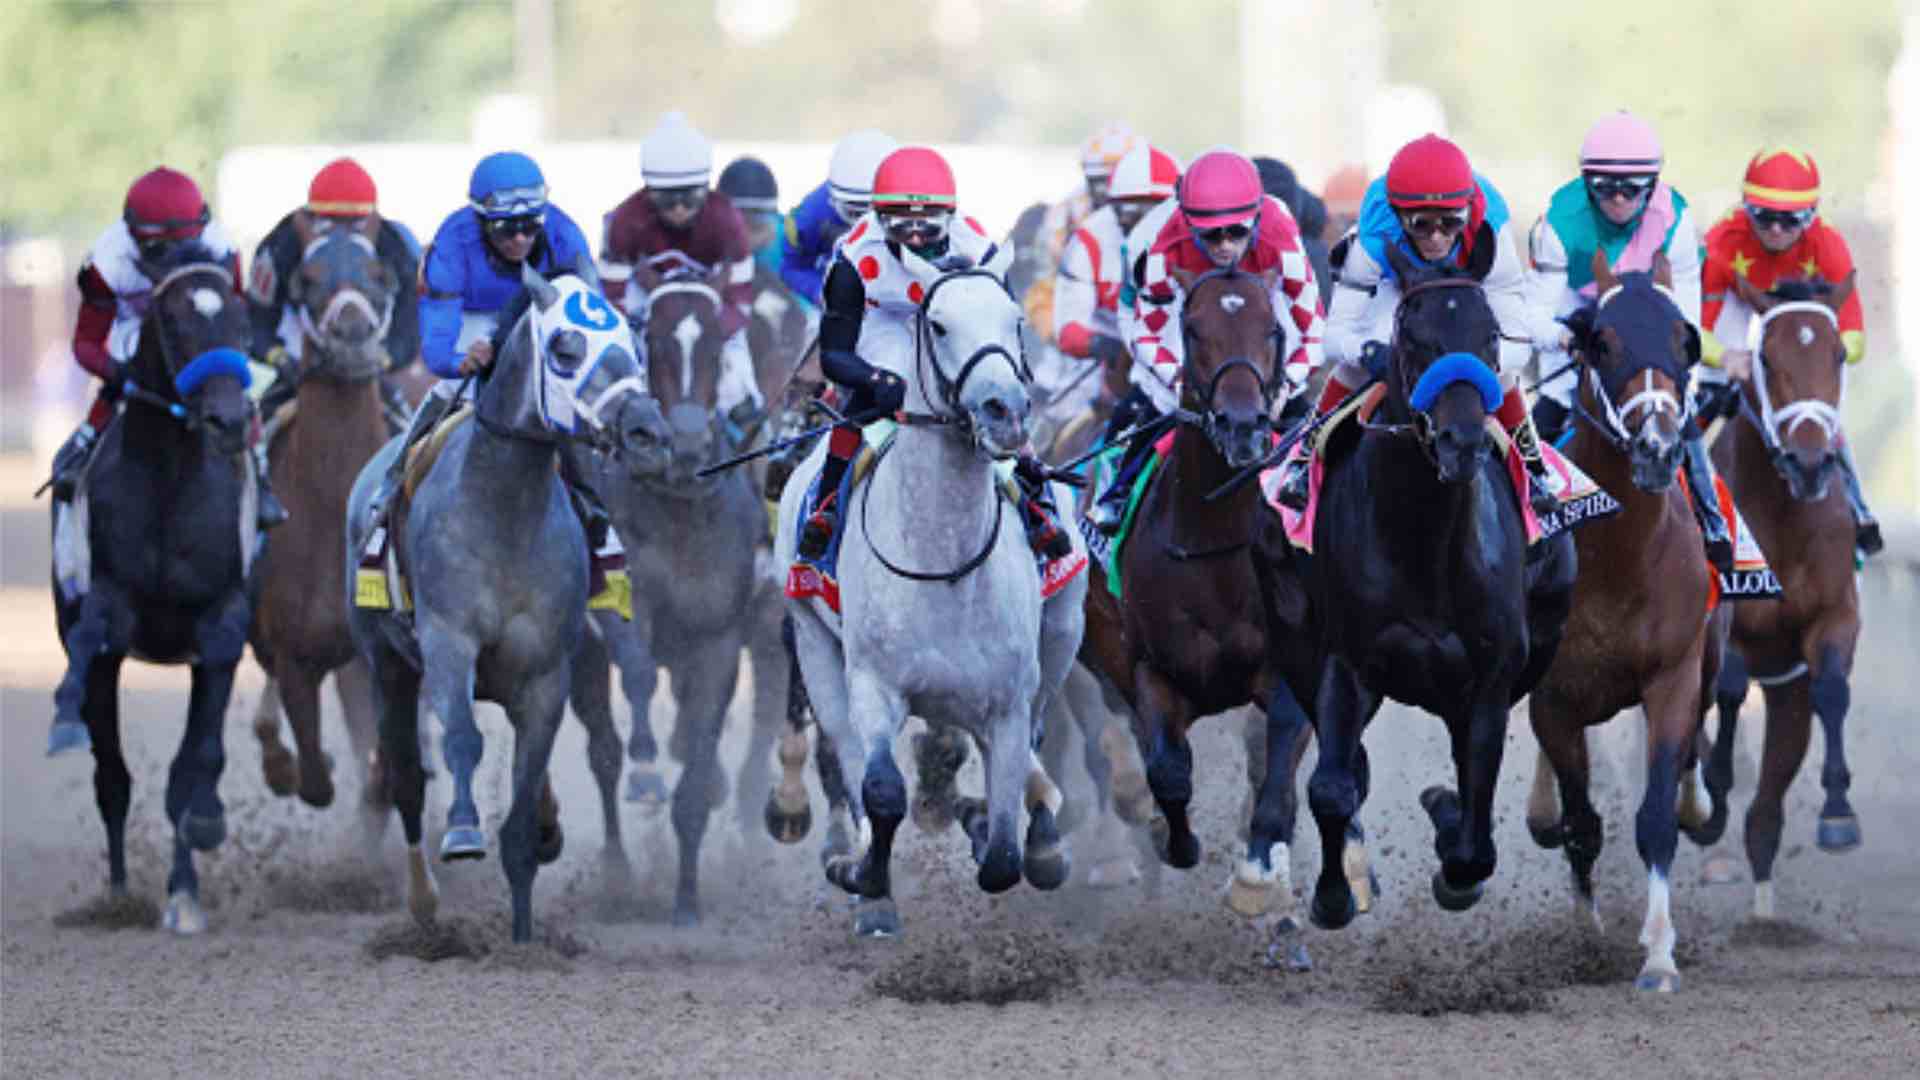 The 147th running of the Kentucky Derby at Churchill Downs on May 1, 2021 in Louisville, Kentucky. (Photo by Sarah Stier/Getty Images)